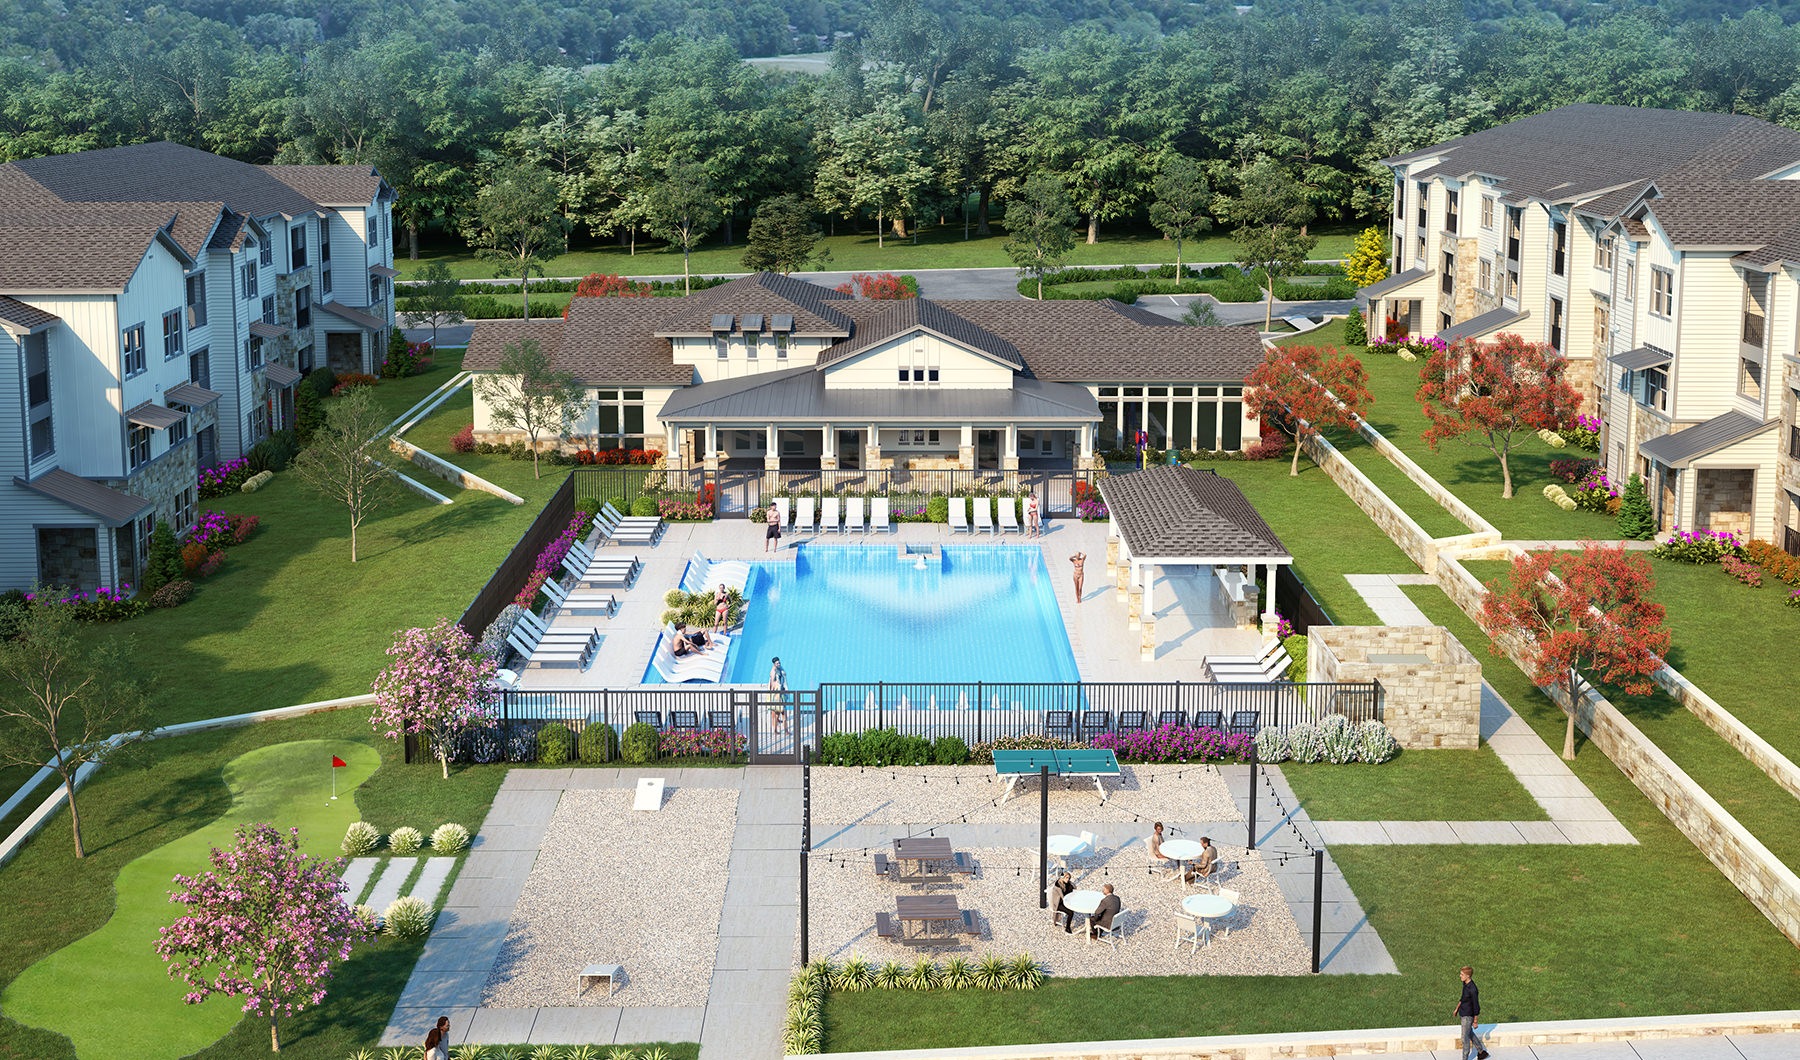 Aerial view of the sparkling blue swimming pool at Chisholm Trace Apartments